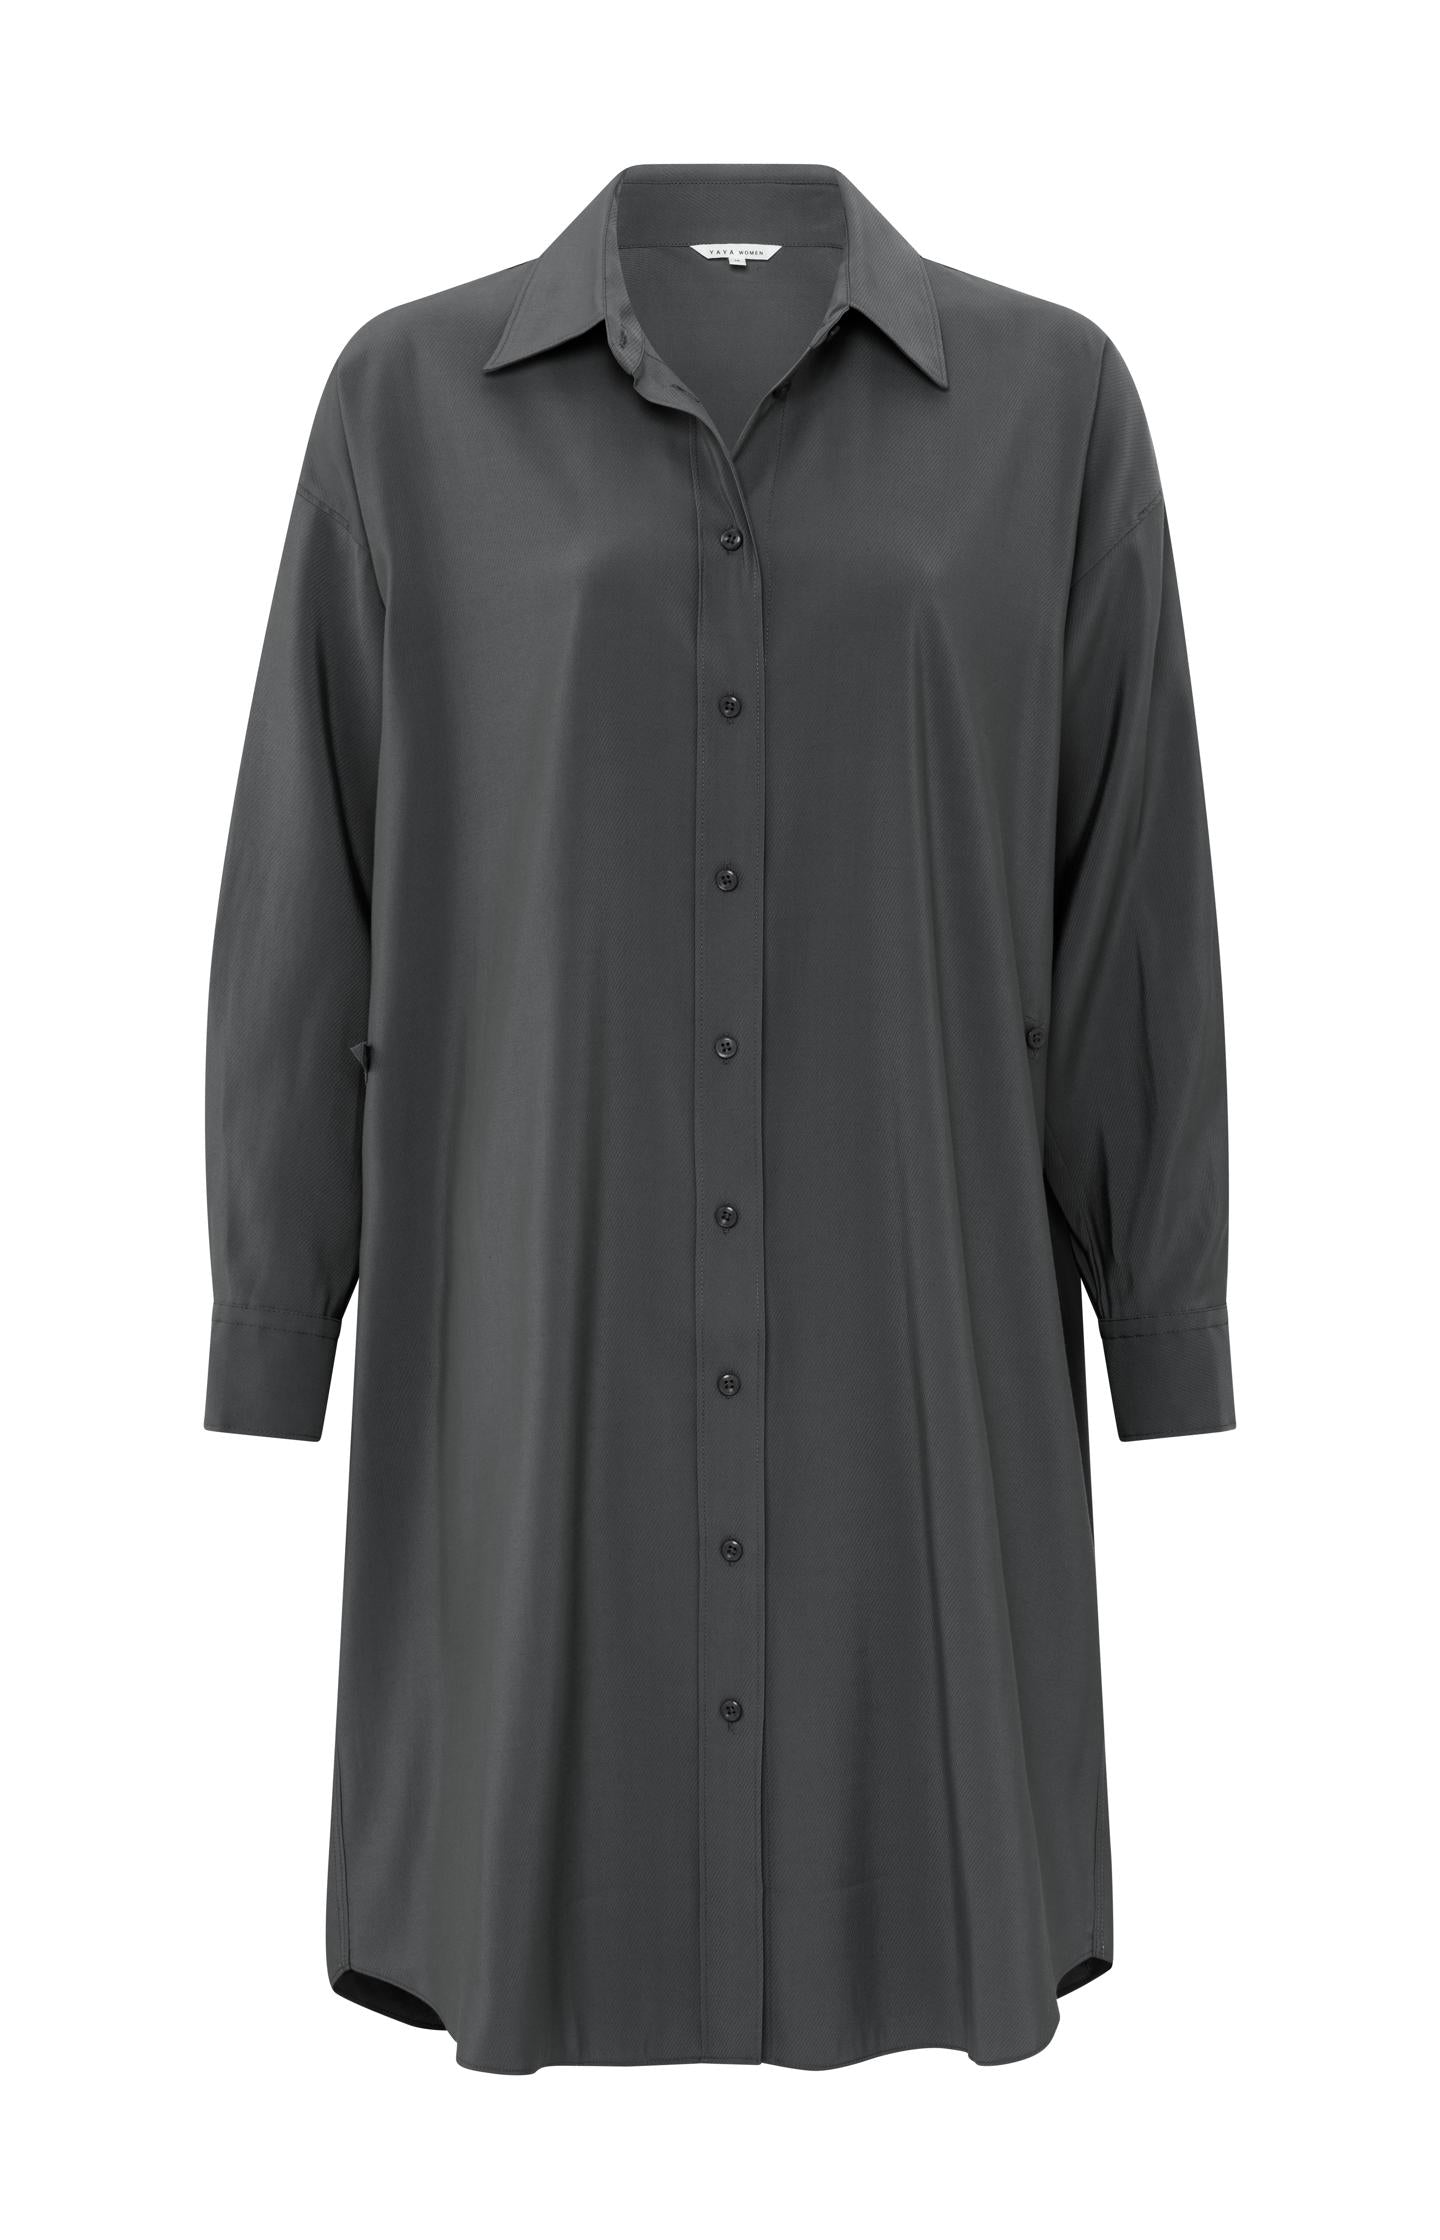 Blouse dress with long sleeves, buttons, and pleated details - Type: product